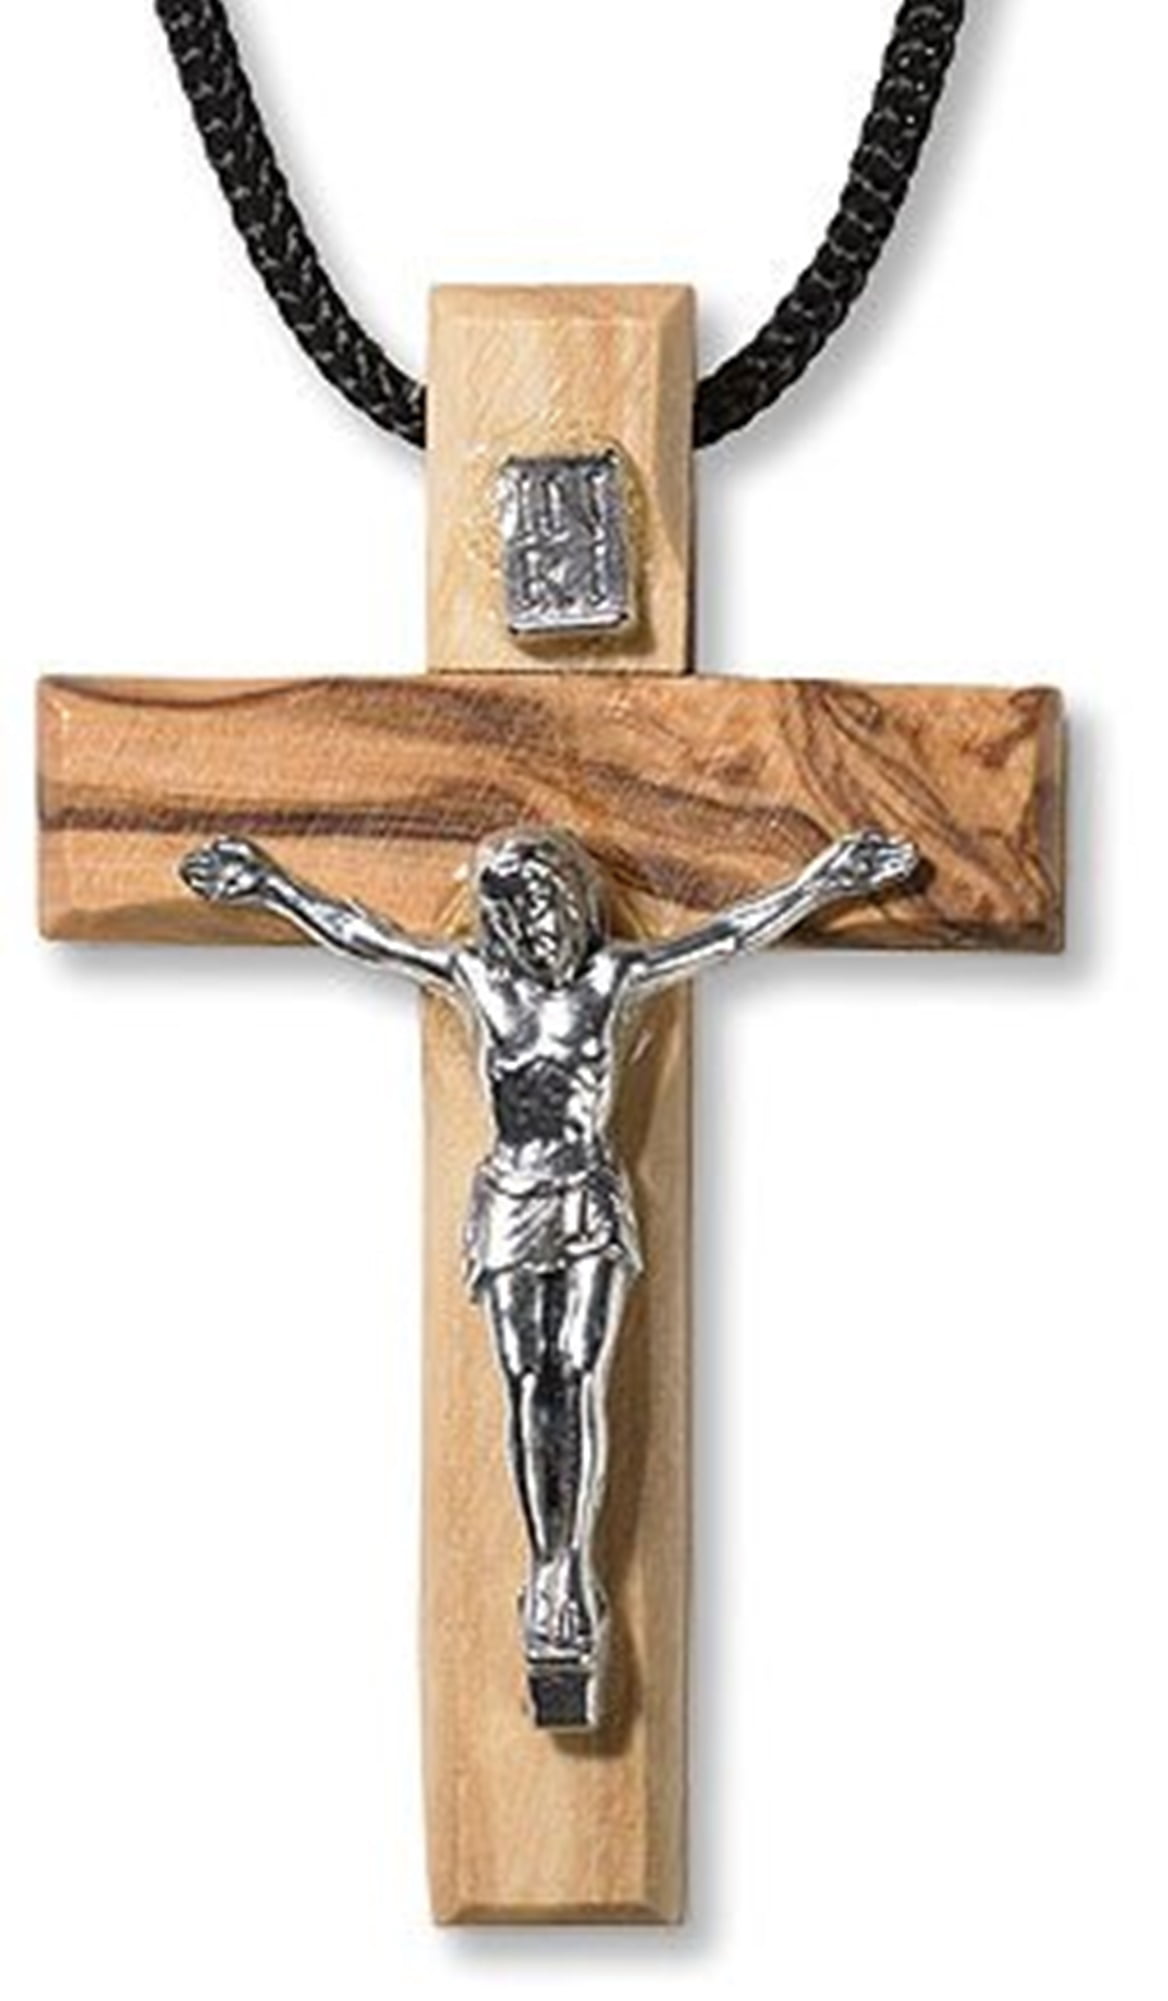 Update more than 154 crucifix necklace wood best